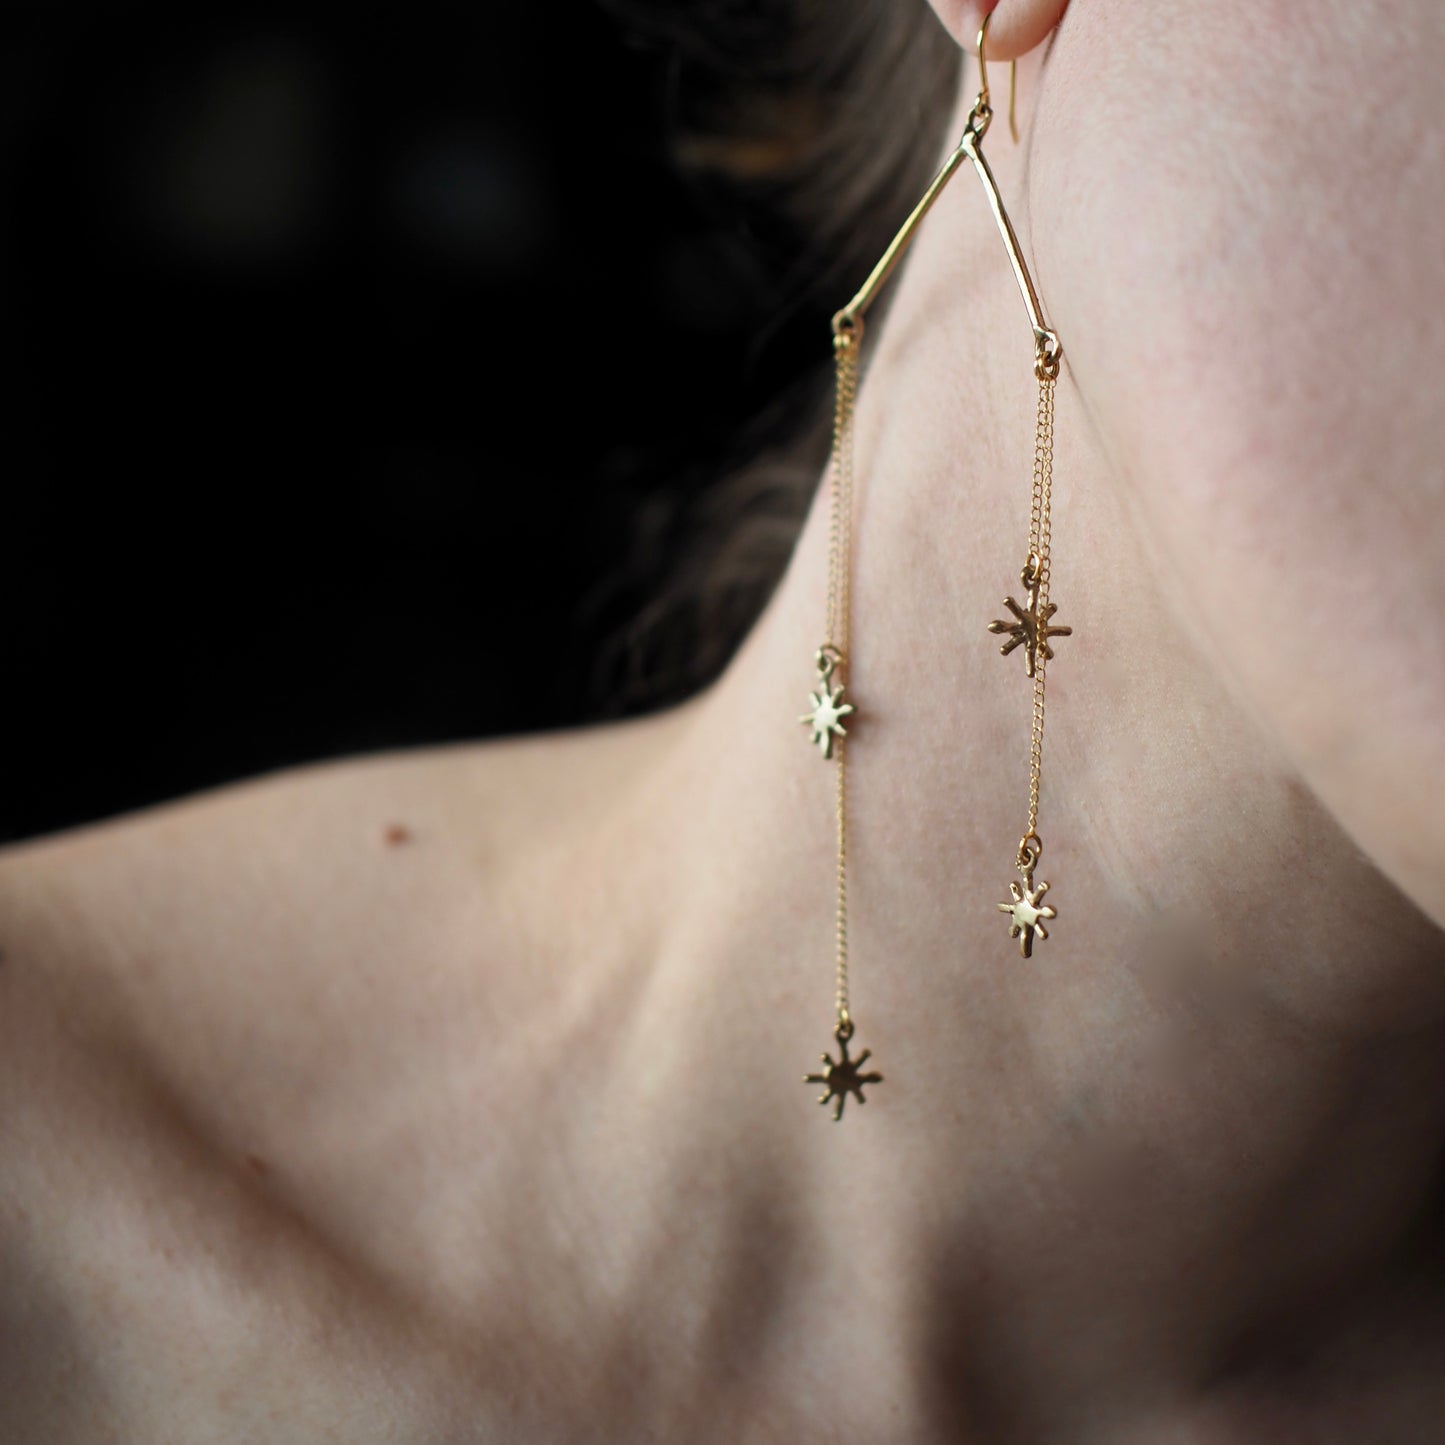 Sparkle star earrings handmade by Iron Oxide Designs